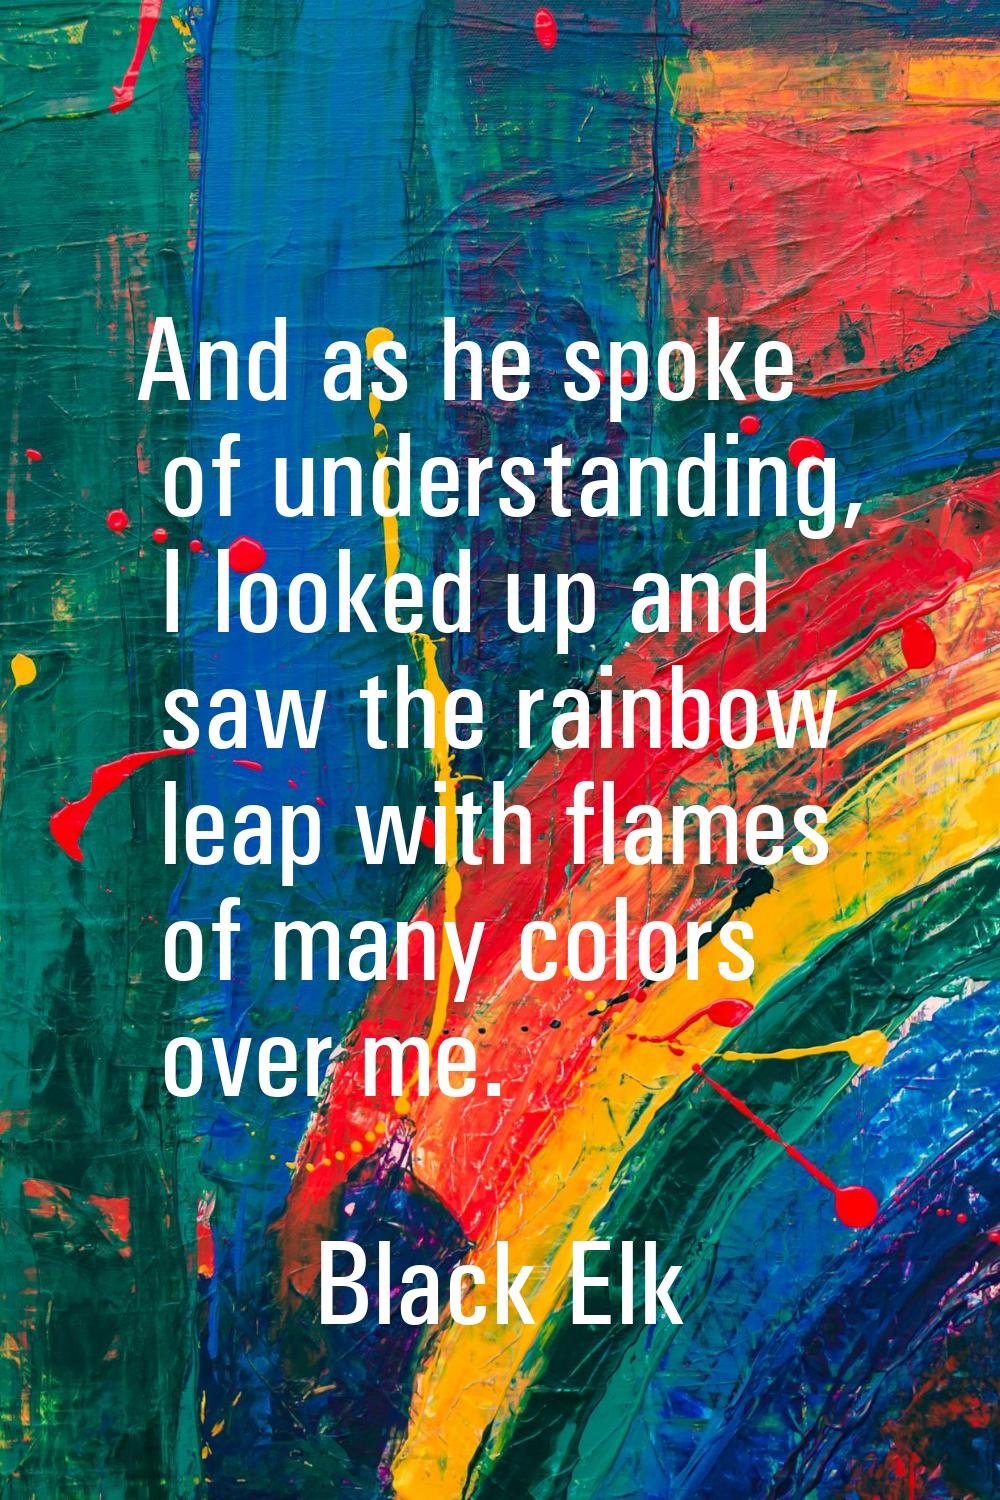 And as he spoke of understanding, I looked up and saw the rainbow leap with flames of many colors o